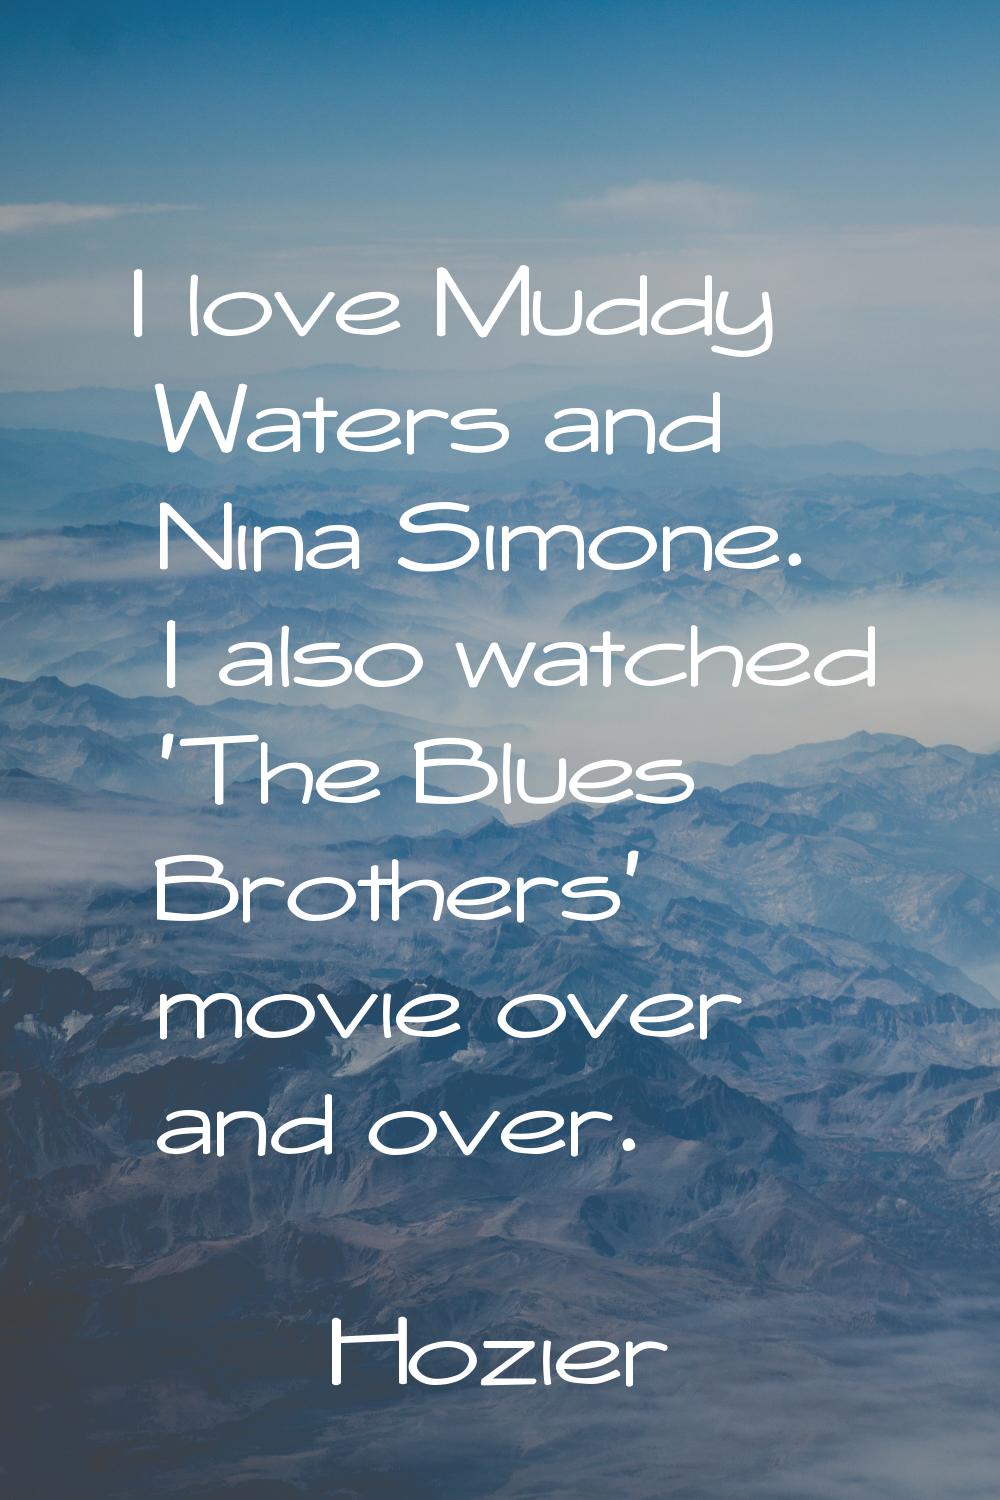 I love Muddy Waters and Nina Simone. I also watched 'The Blues Brothers' movie over and over.